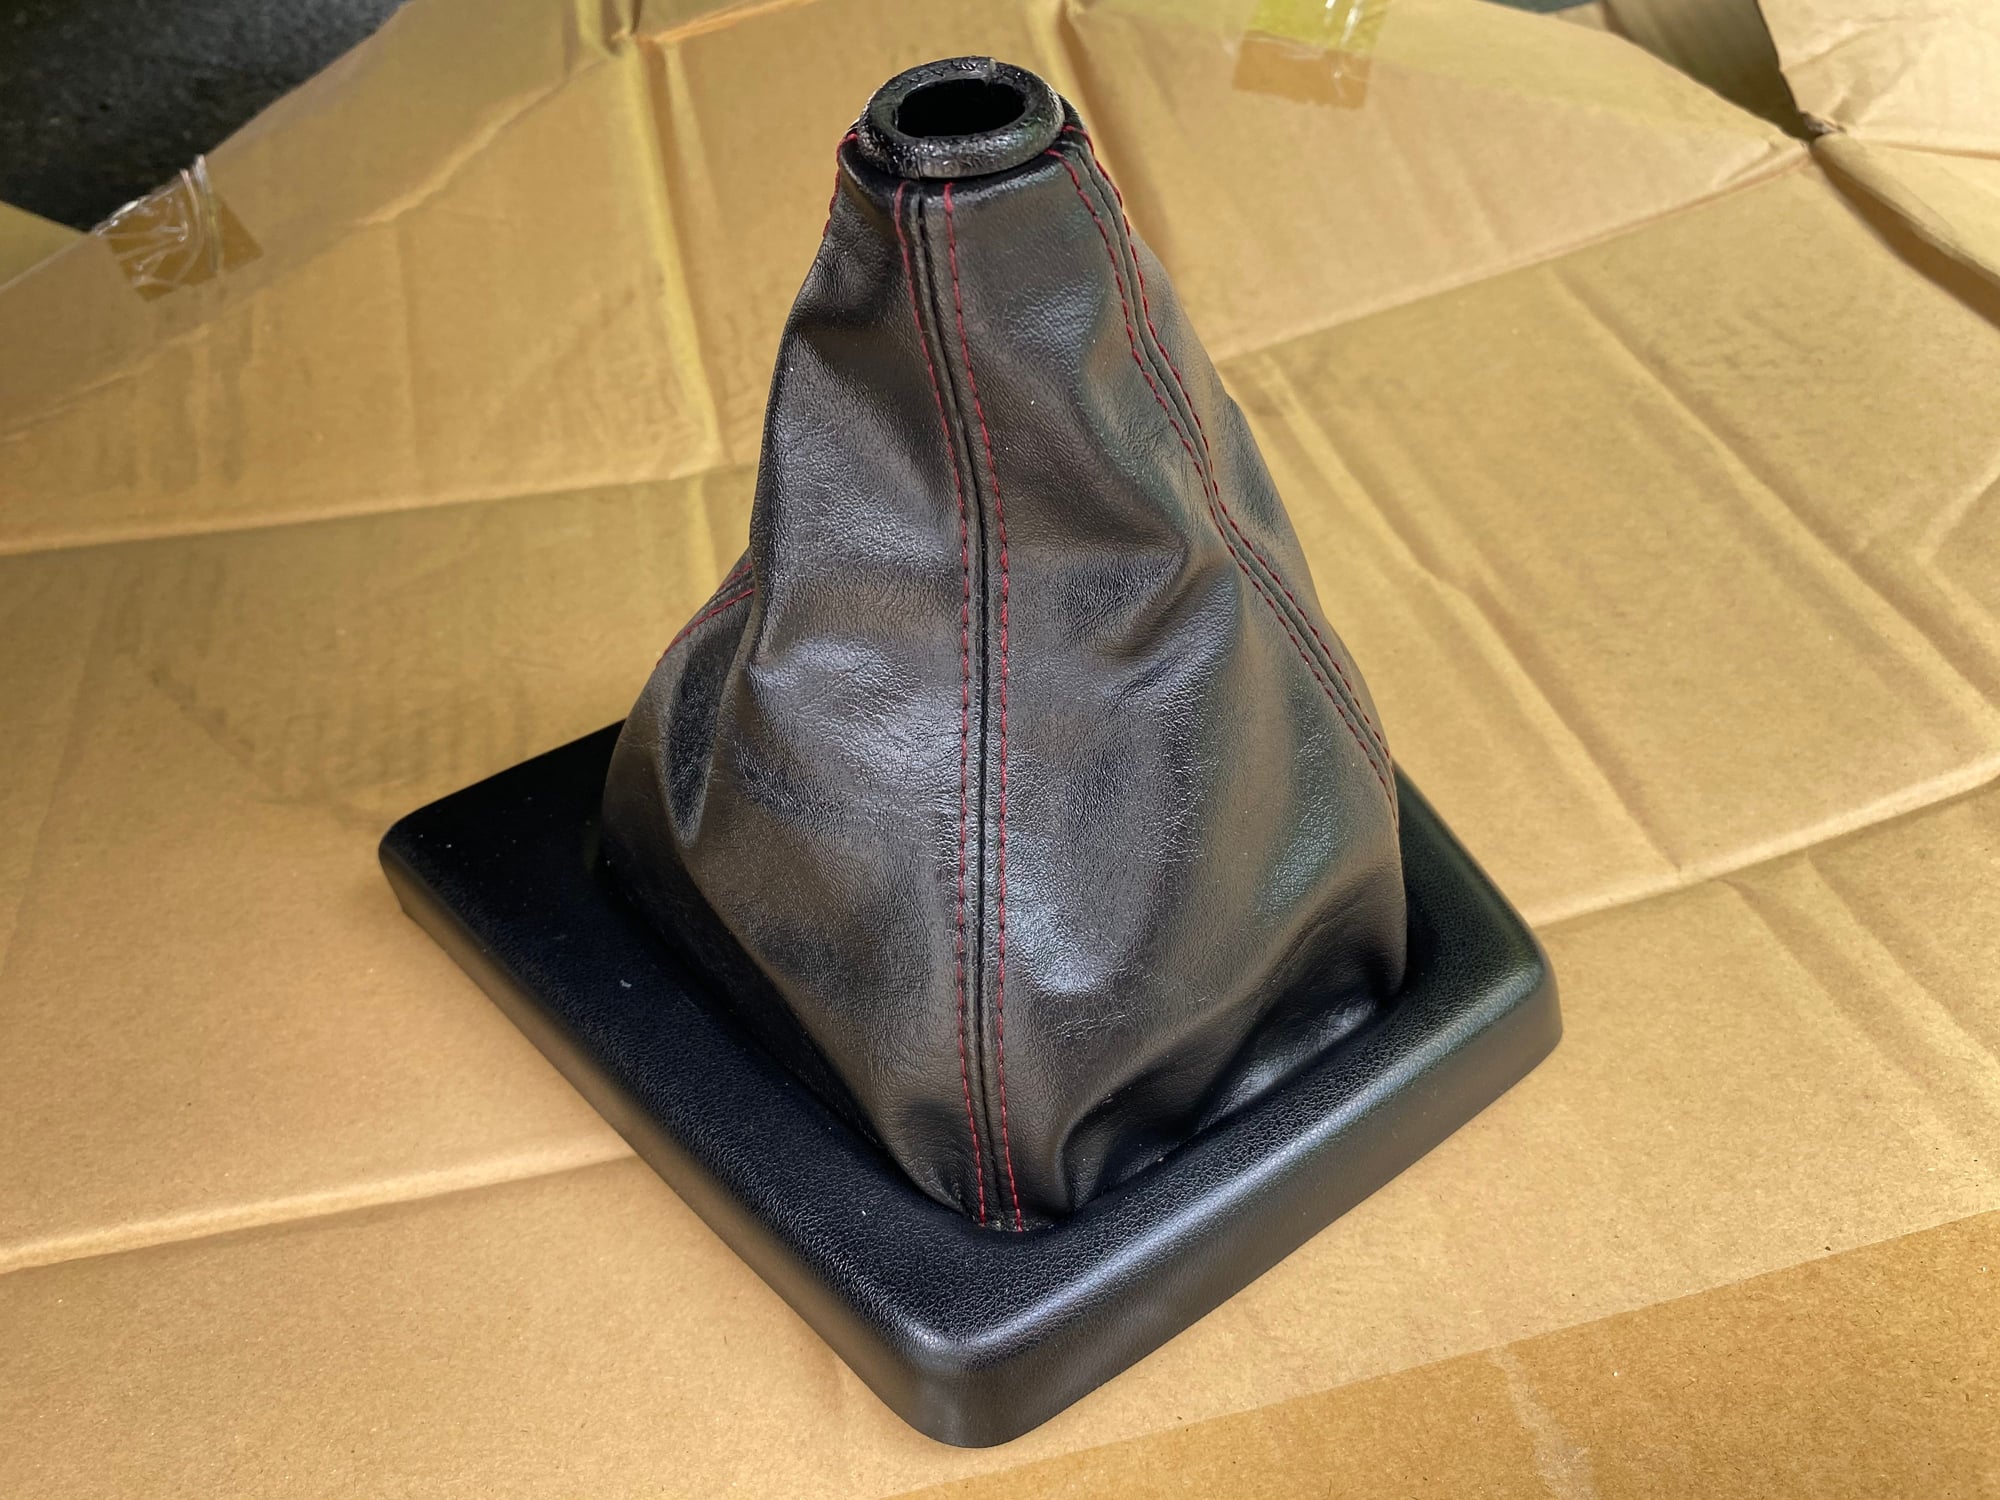 Interior/Upholstery - R Magic Leather shift Boot! Rx-7 FC - Used - 1986 to 1991 Mazda RX-7 - Prince Frederick, MD 20678, United States